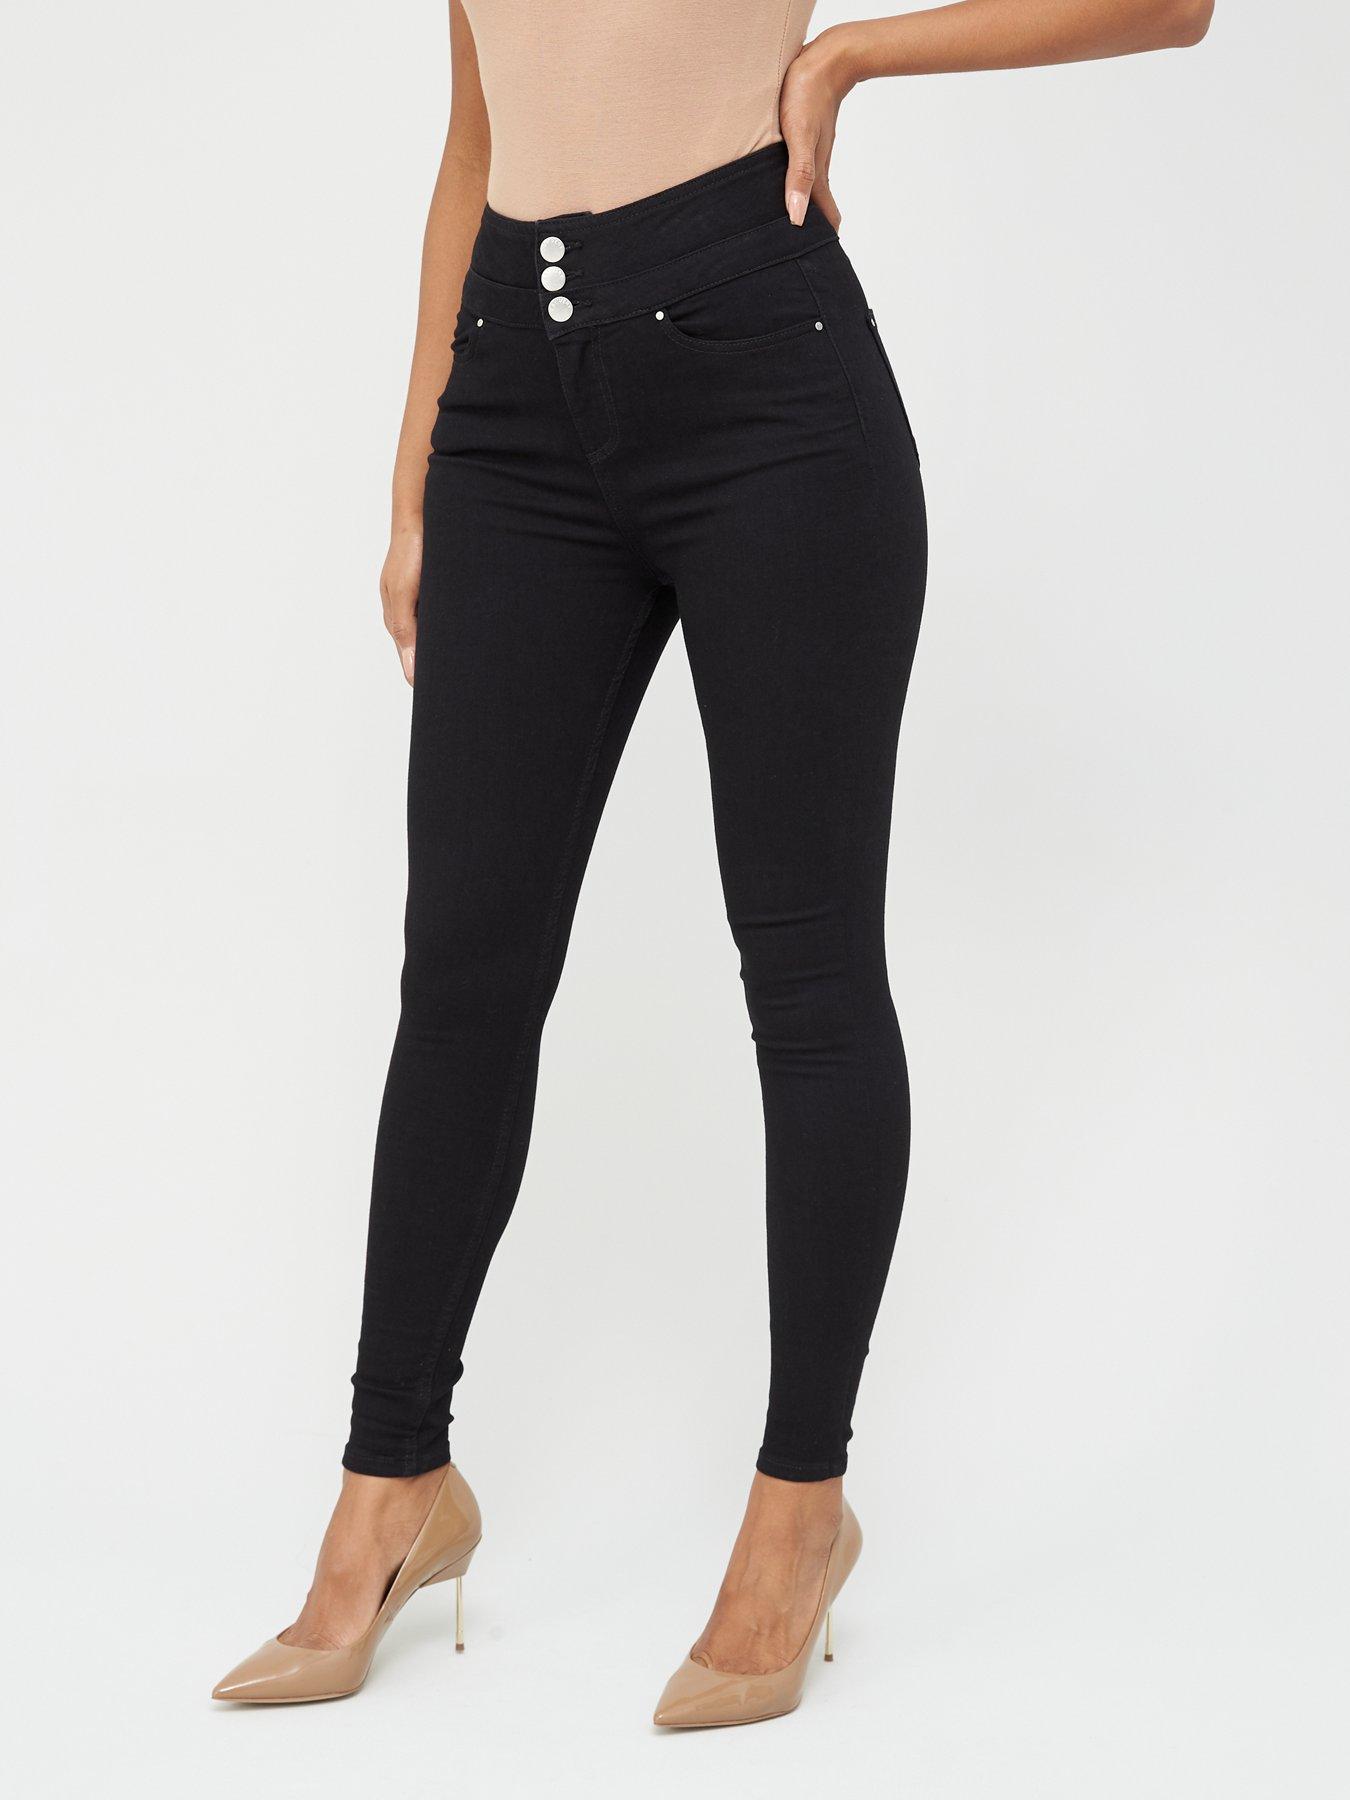 Style & Co Women's High-Rise Bootcut Leggings, Created for Macy's - Macy's